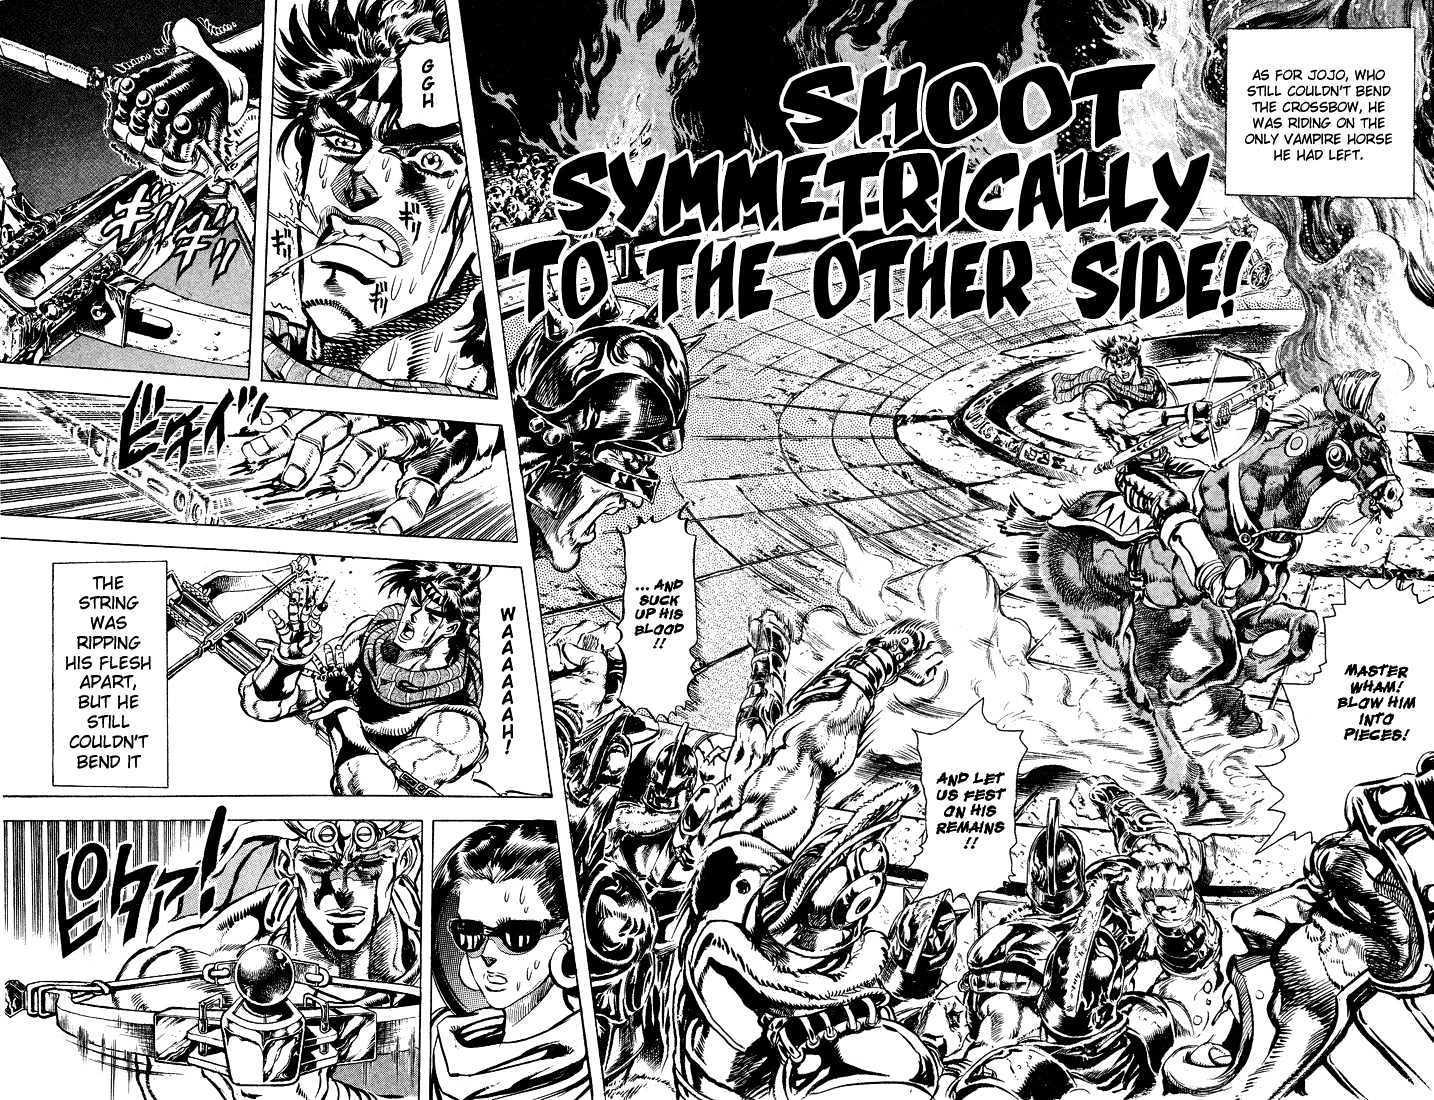 Jojo's Bizarre Adventure Vol.11 Chapter 102 : Shoot Symmetrically To The Other Side! page 2 - 